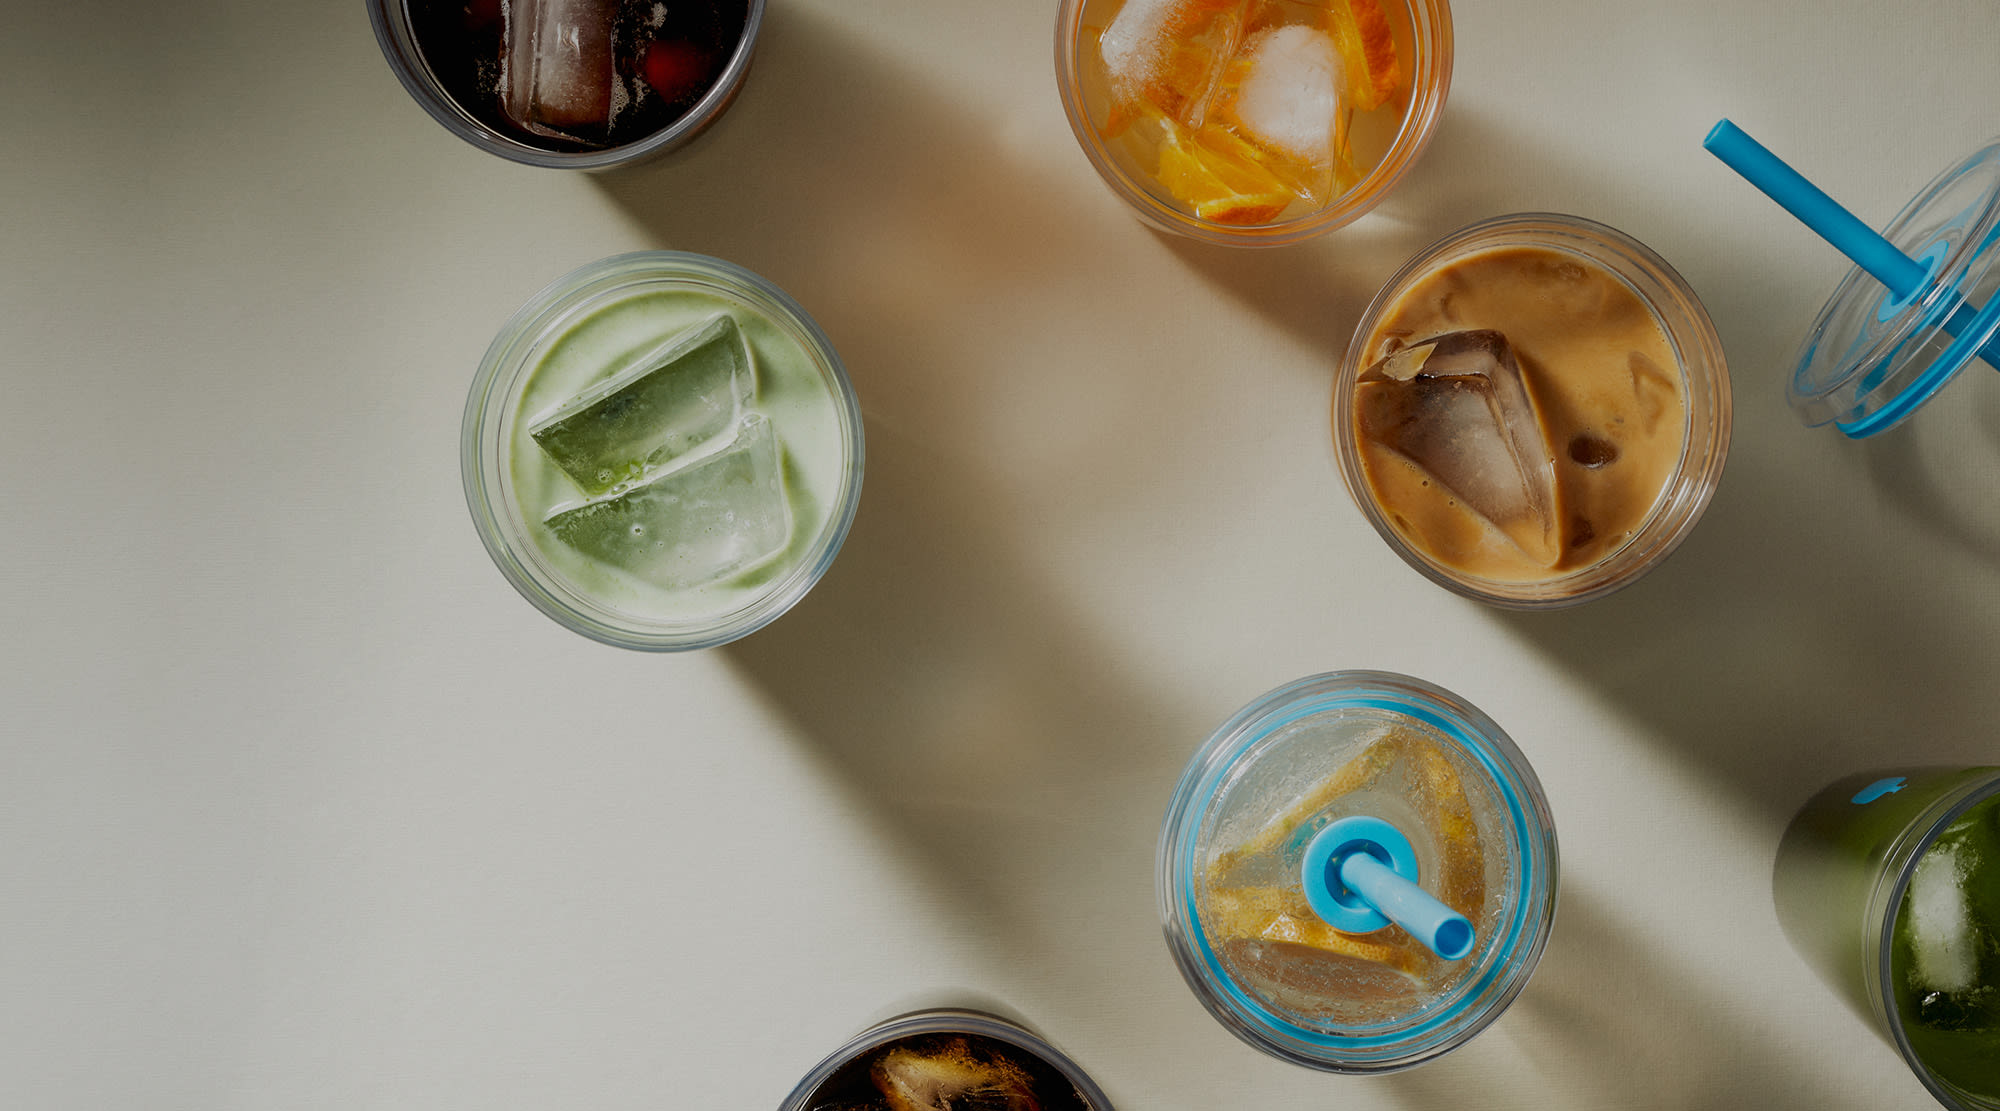 Image of Clear Cold Tumblers from above, showing several different prepared iced beverages in a colorful manner